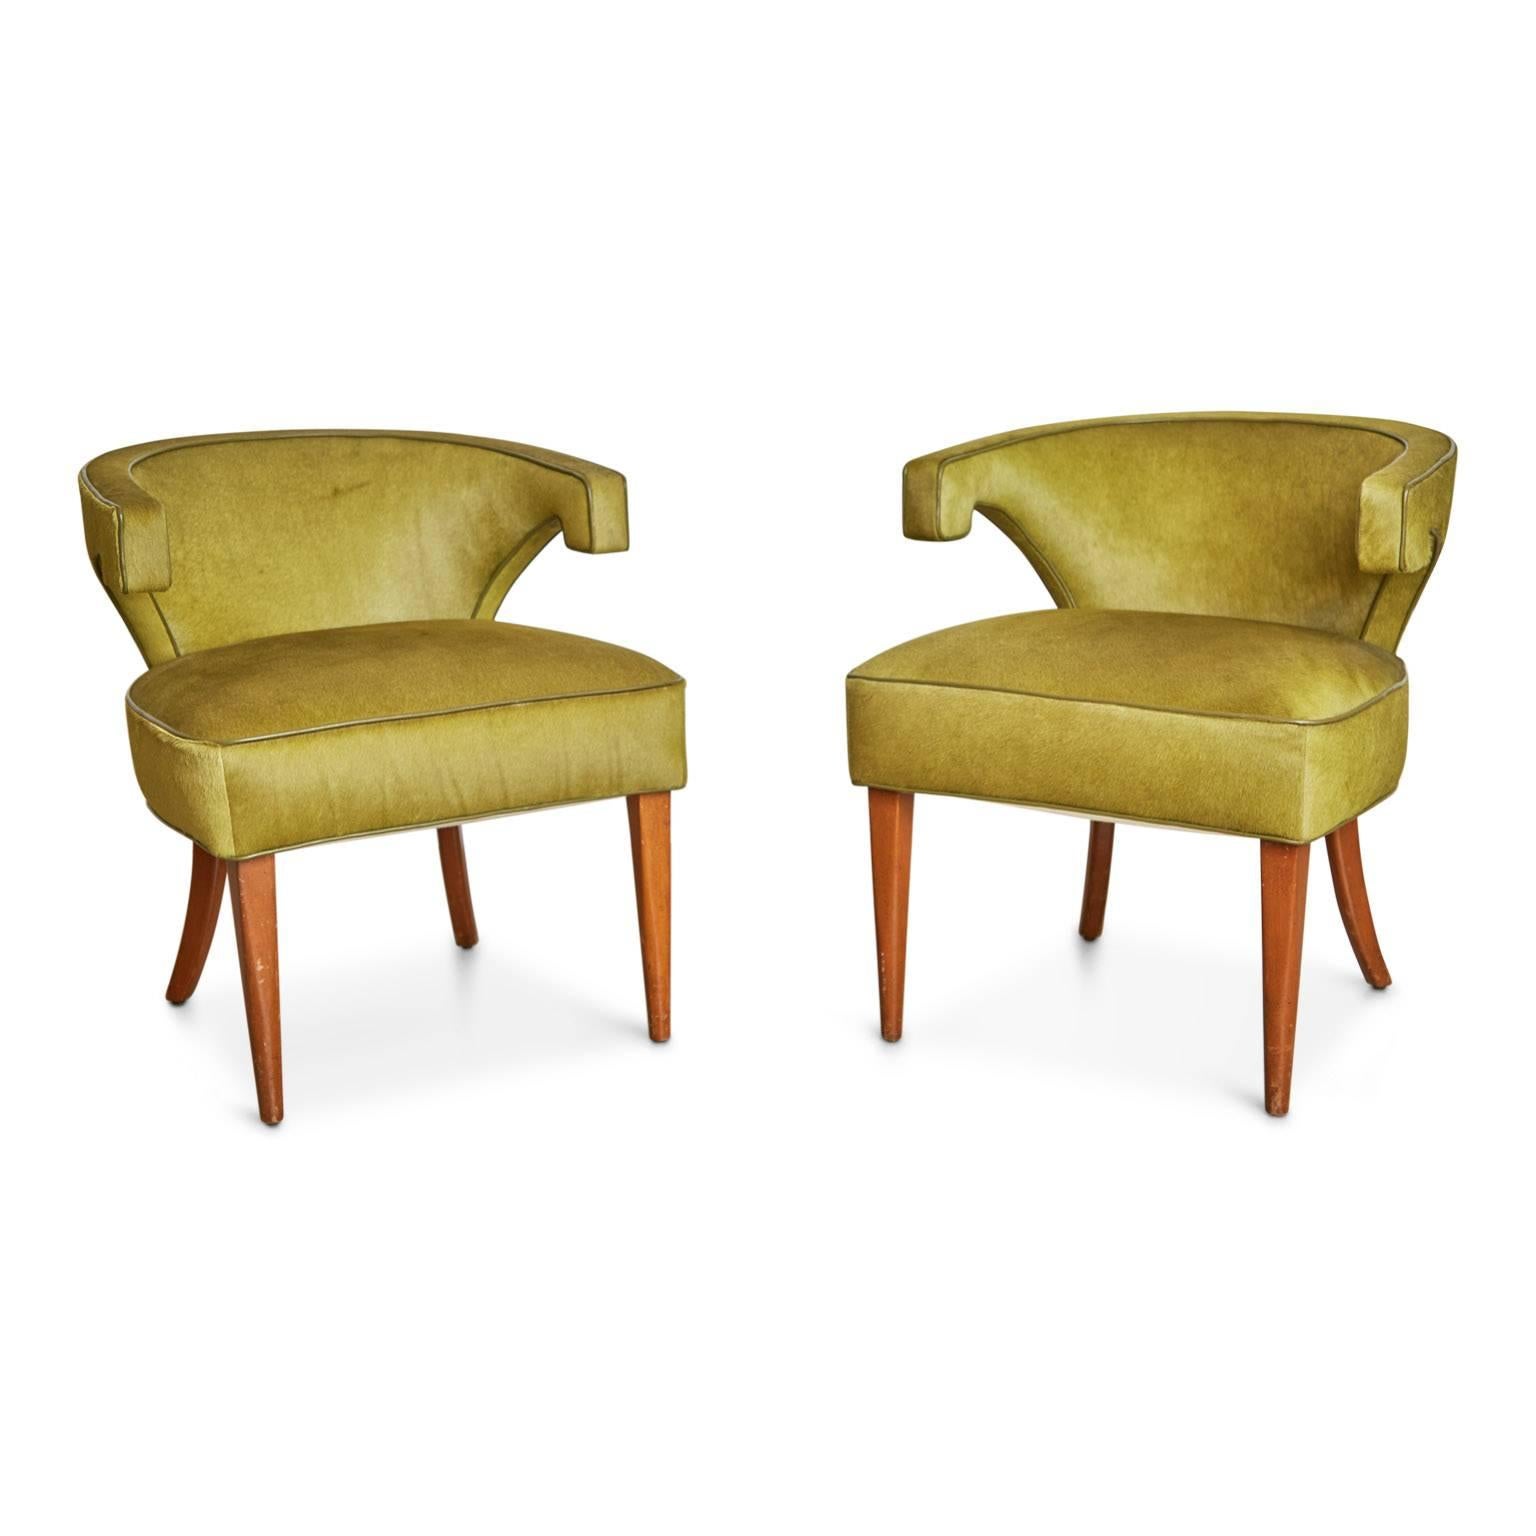 Wonderful pair of Veronese Klismos chairs by Tommi Parzinger which have been newly upholstered in a lush olive green hair-on-hide leather with color matching leather trim. The curvaceous silhouette of these armchairs with their distinct angular arms